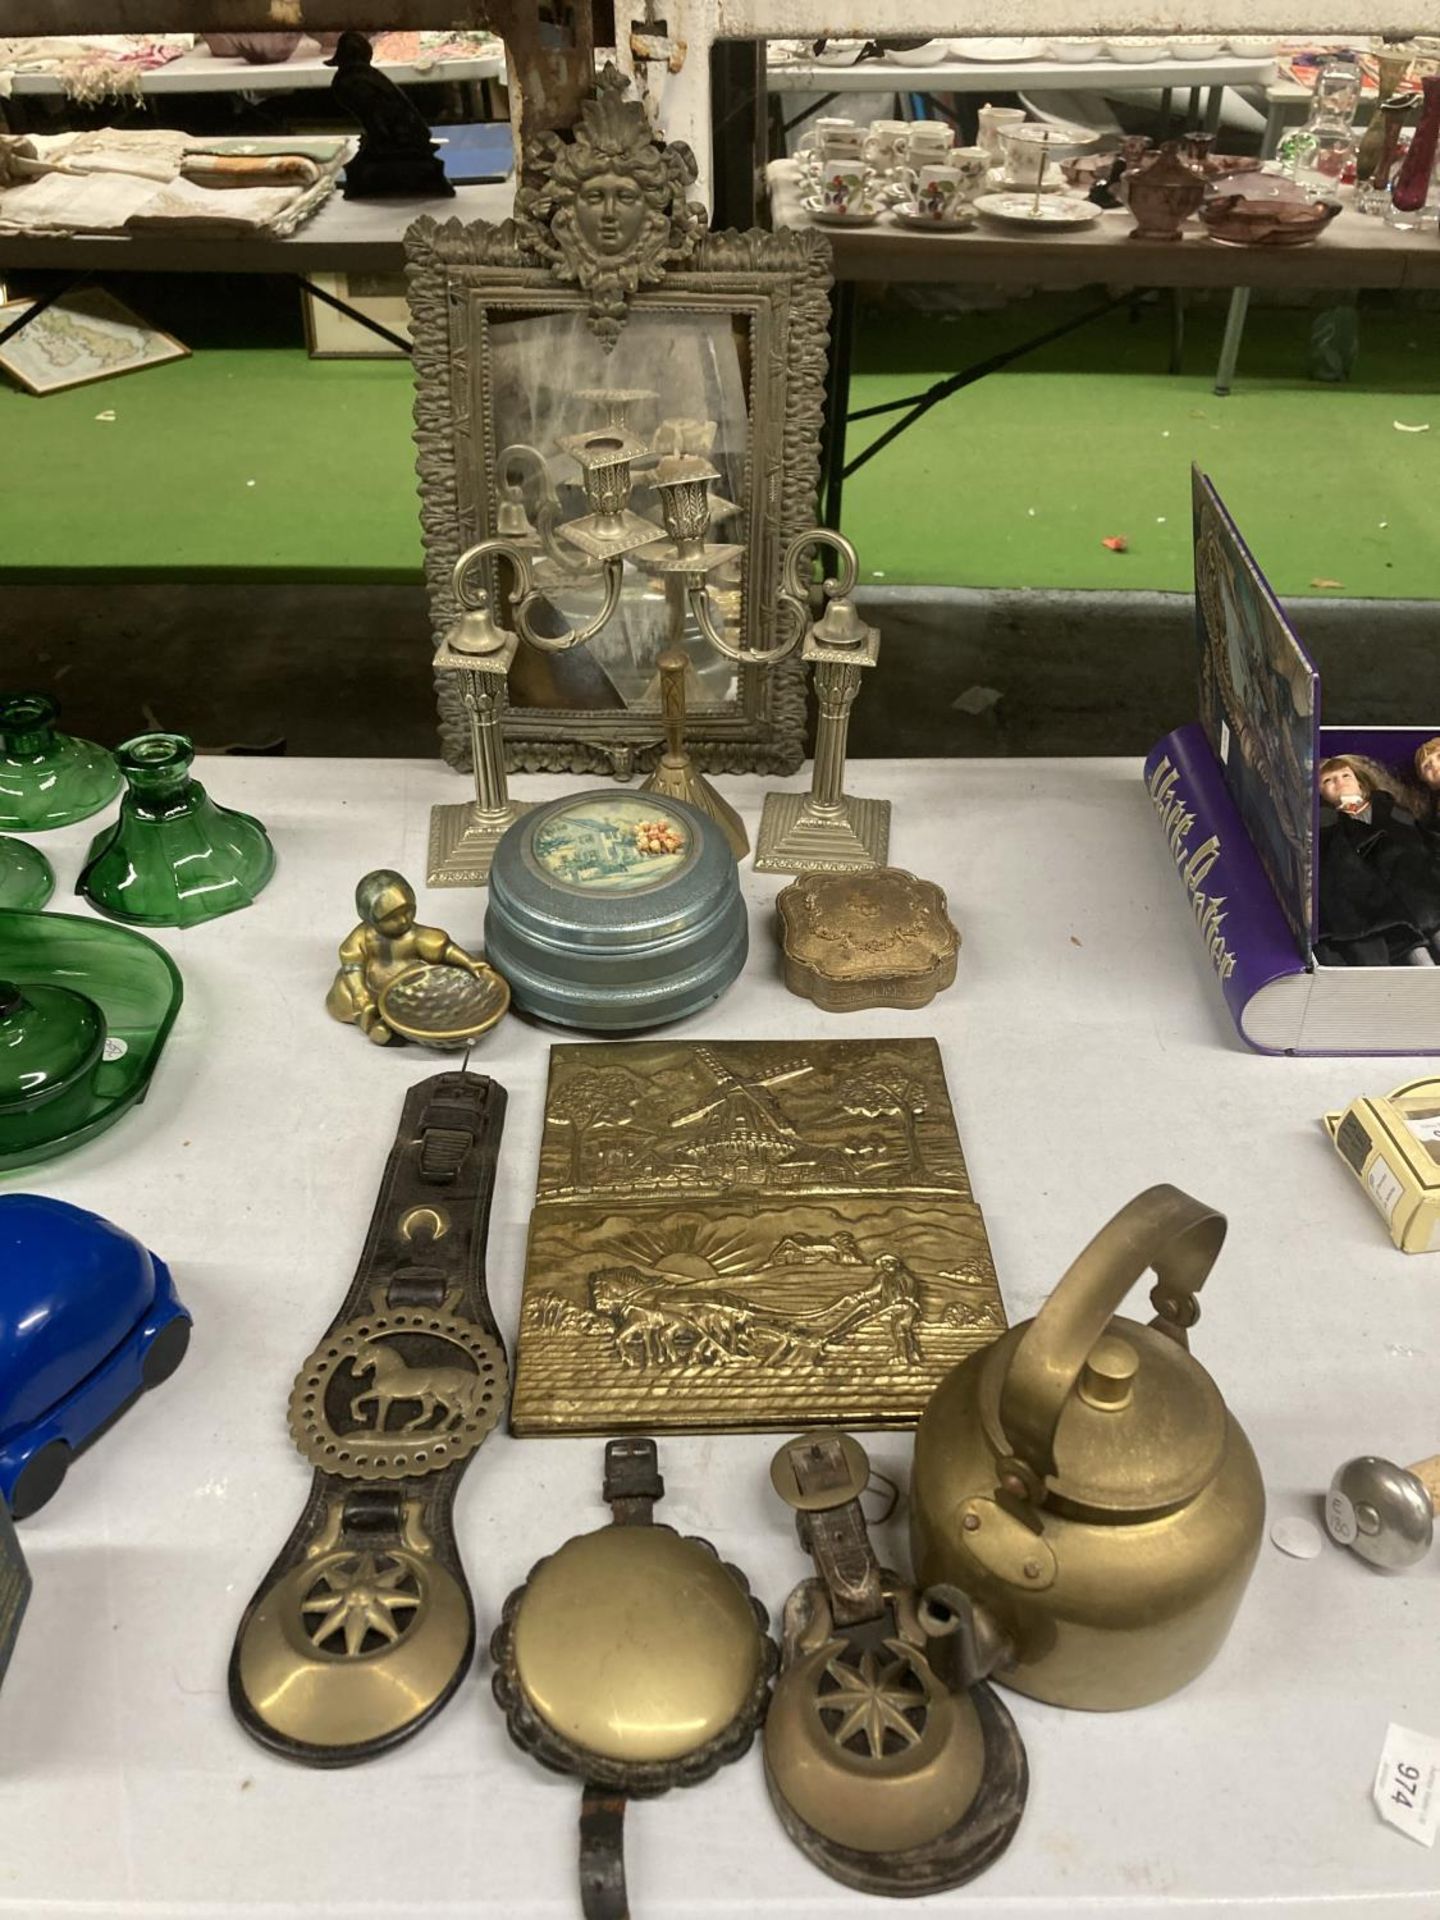 A QUANTITY OF BRASS ITEMS TO INCLUDE A KETTLE, HORSE BRASSES, LETTER RACK, CANDLESTICKS, MIRROR, ETC